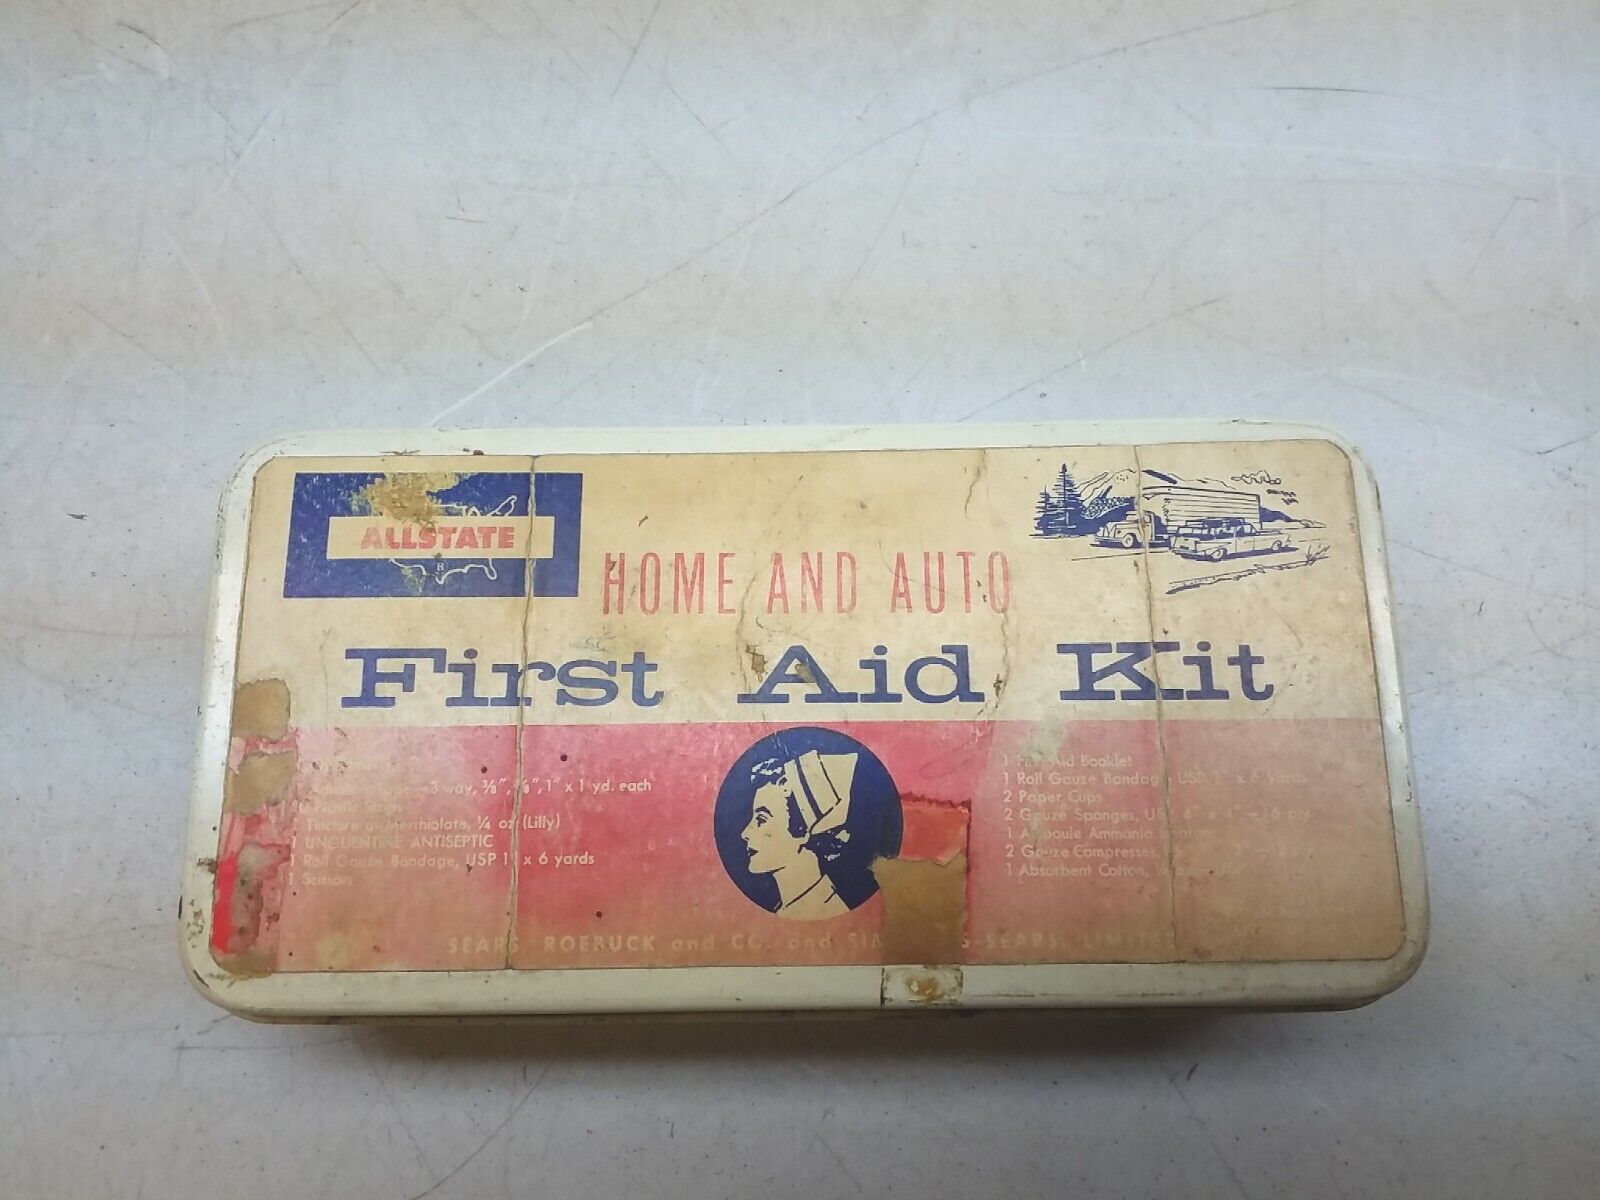 Vintage Allstate Home and Auto First Aid Kit Sears Roebuck and Co Metal Tin